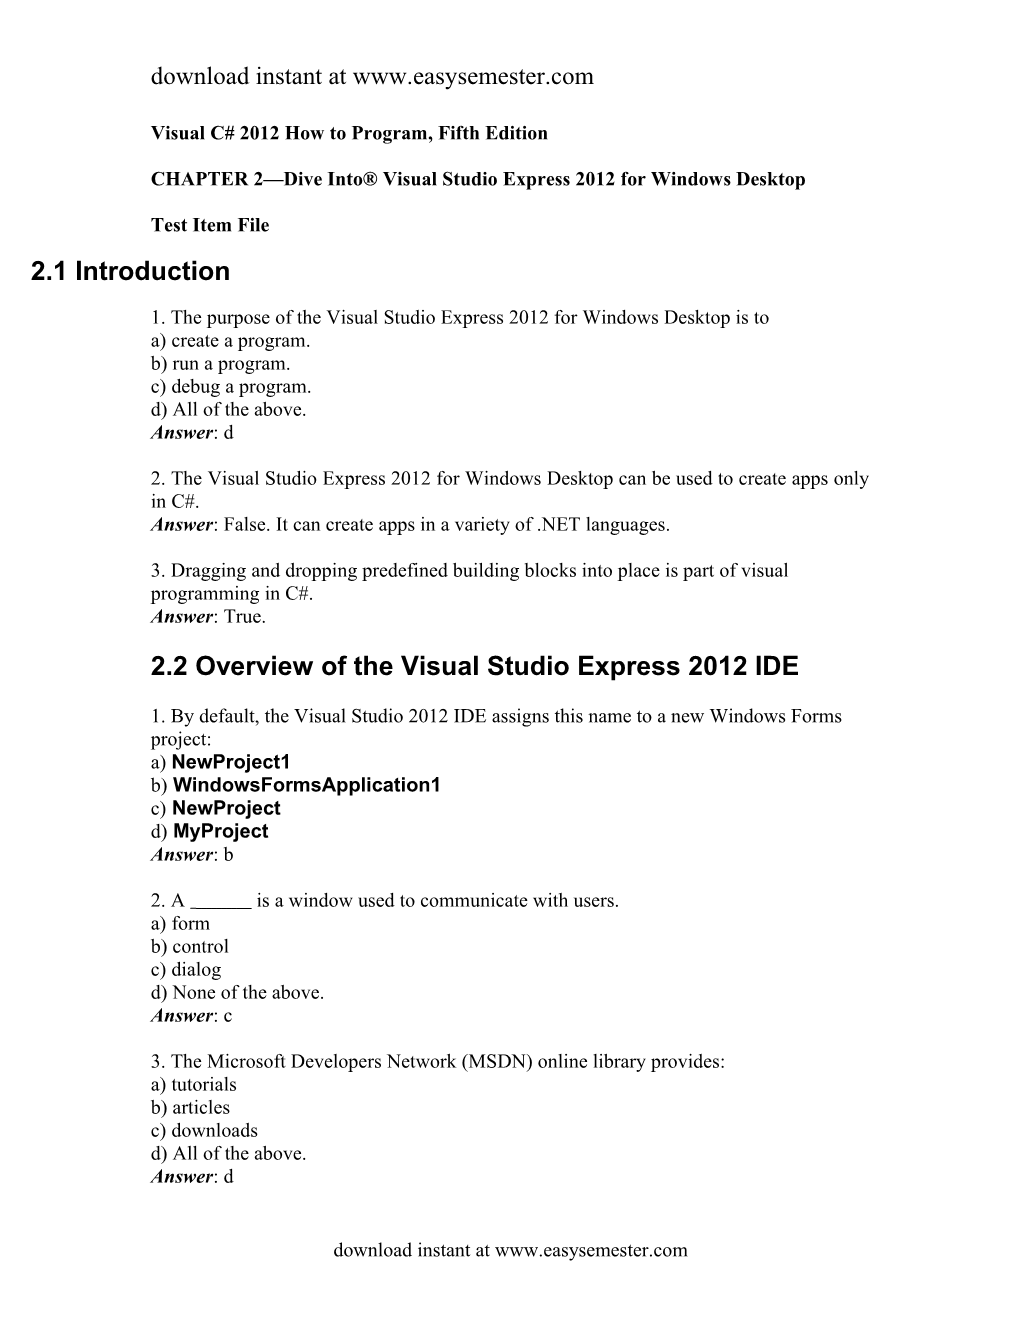 Visualc# 2012How to Program, Fifth Edition